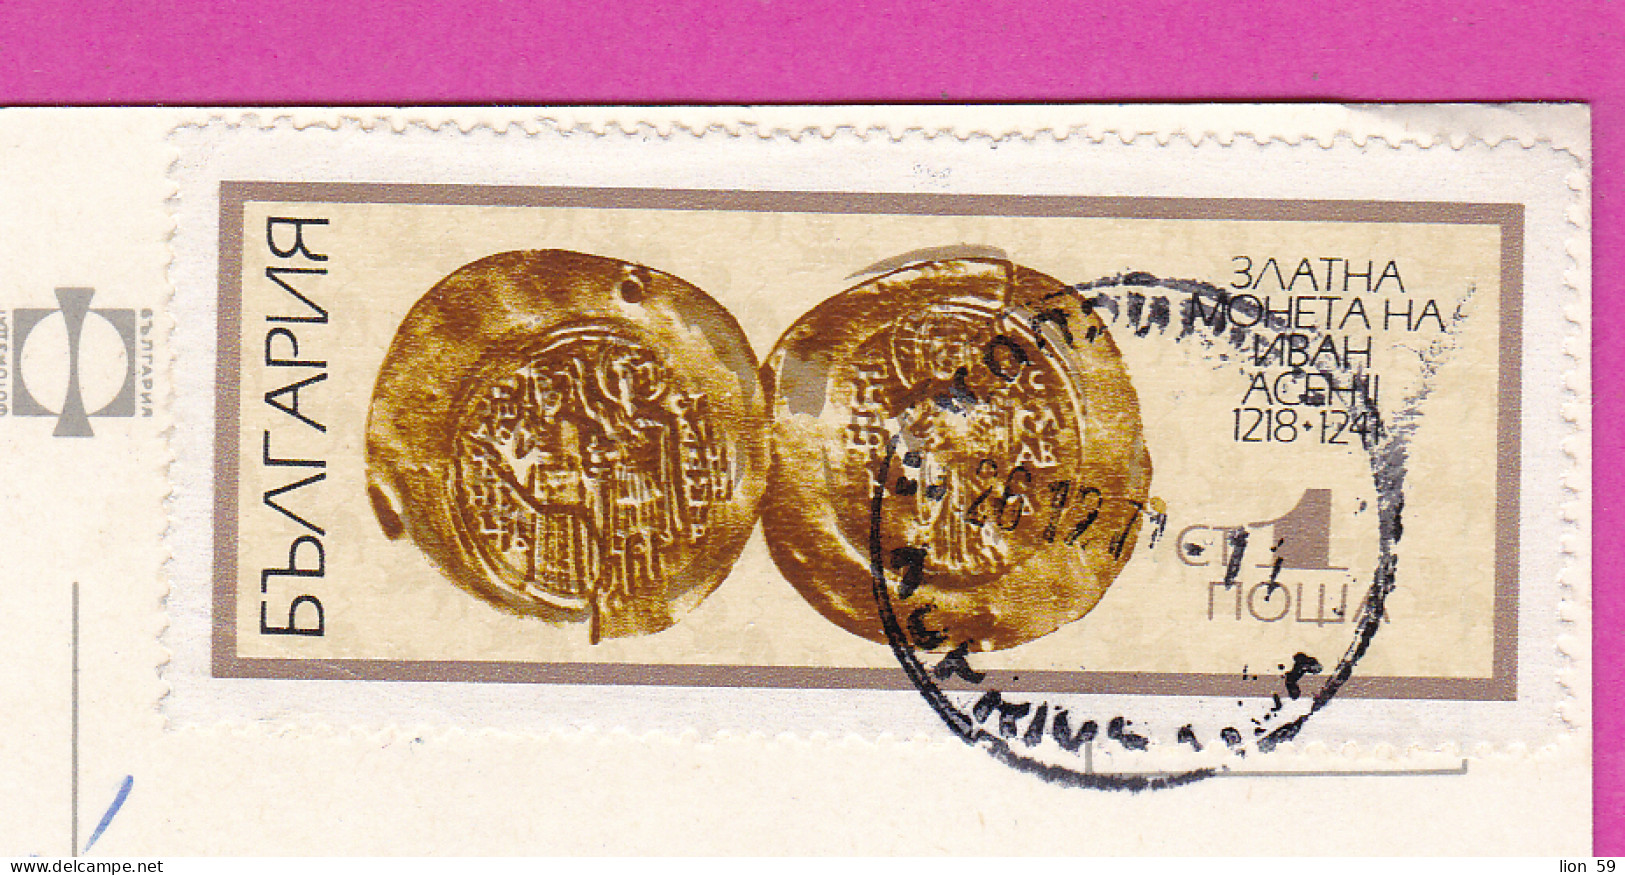 310635 / Bulgaria - Koprivshtitsa - Museum Old "Markov House" PC 1971 USED 1 St. Gold Coin Of Ivan Asen 1218-1241 - Covers & Documents